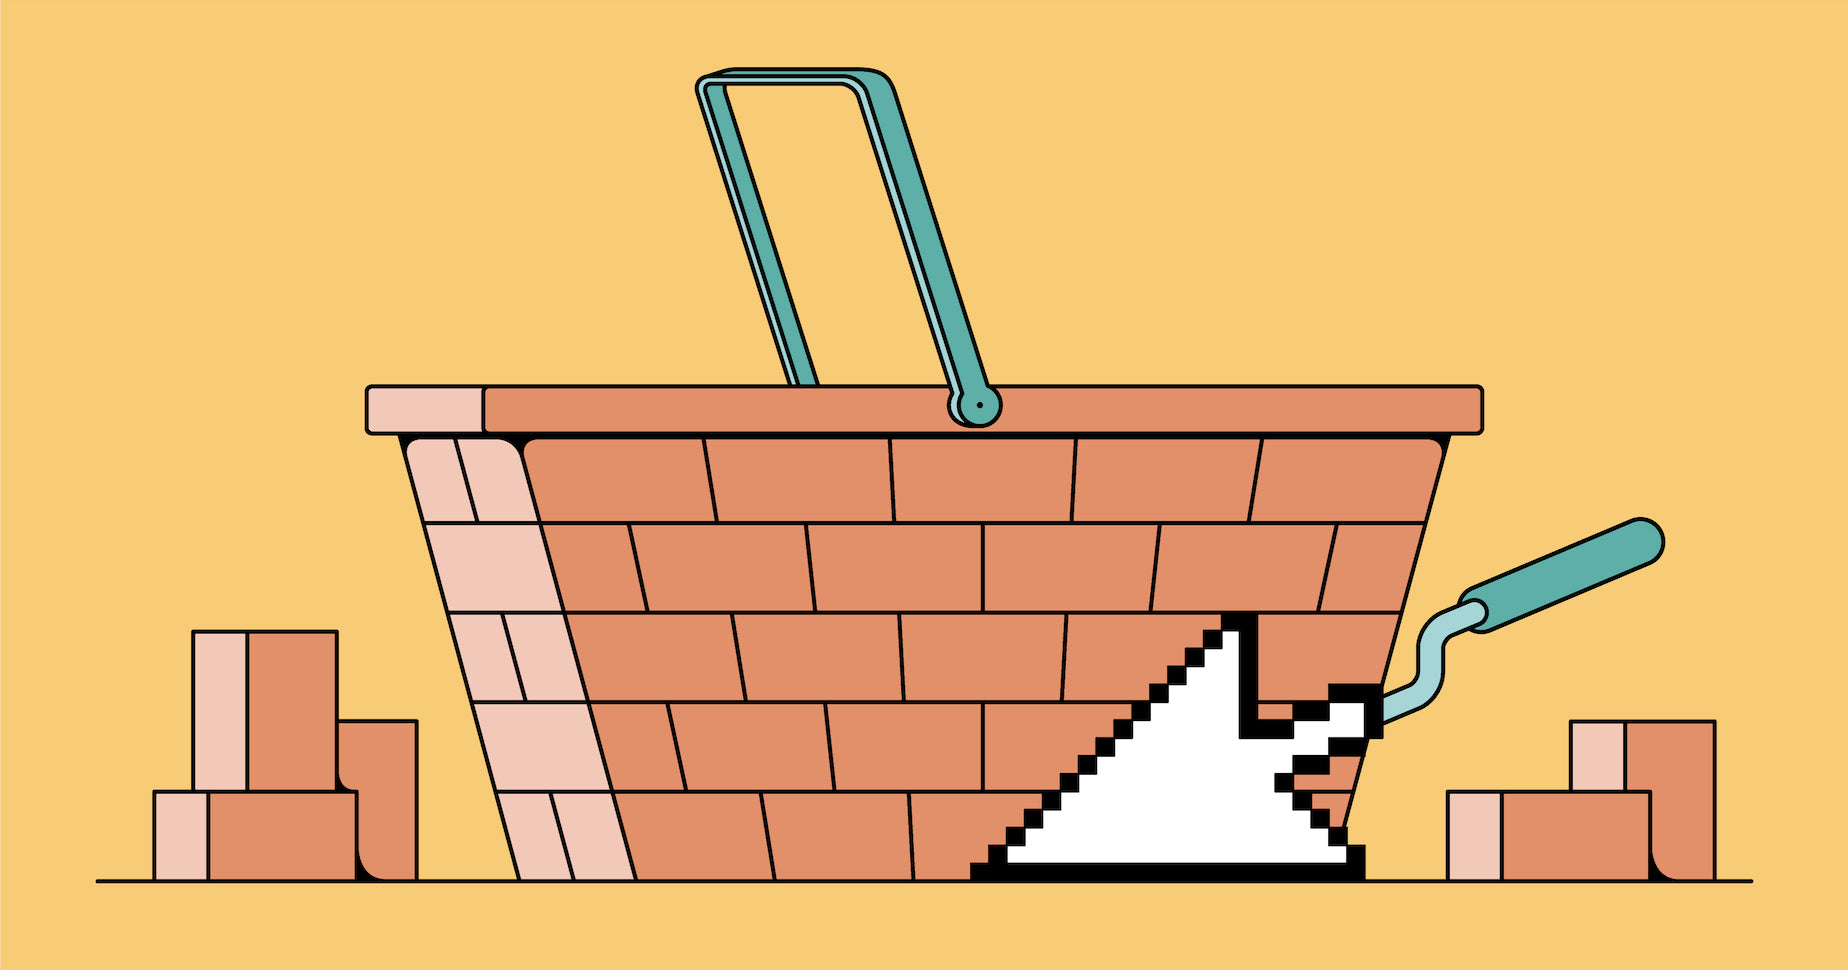 Illustration of a basket made out of bricks and mortar, showcasing how an ecommerce website builder can help you construct an online store